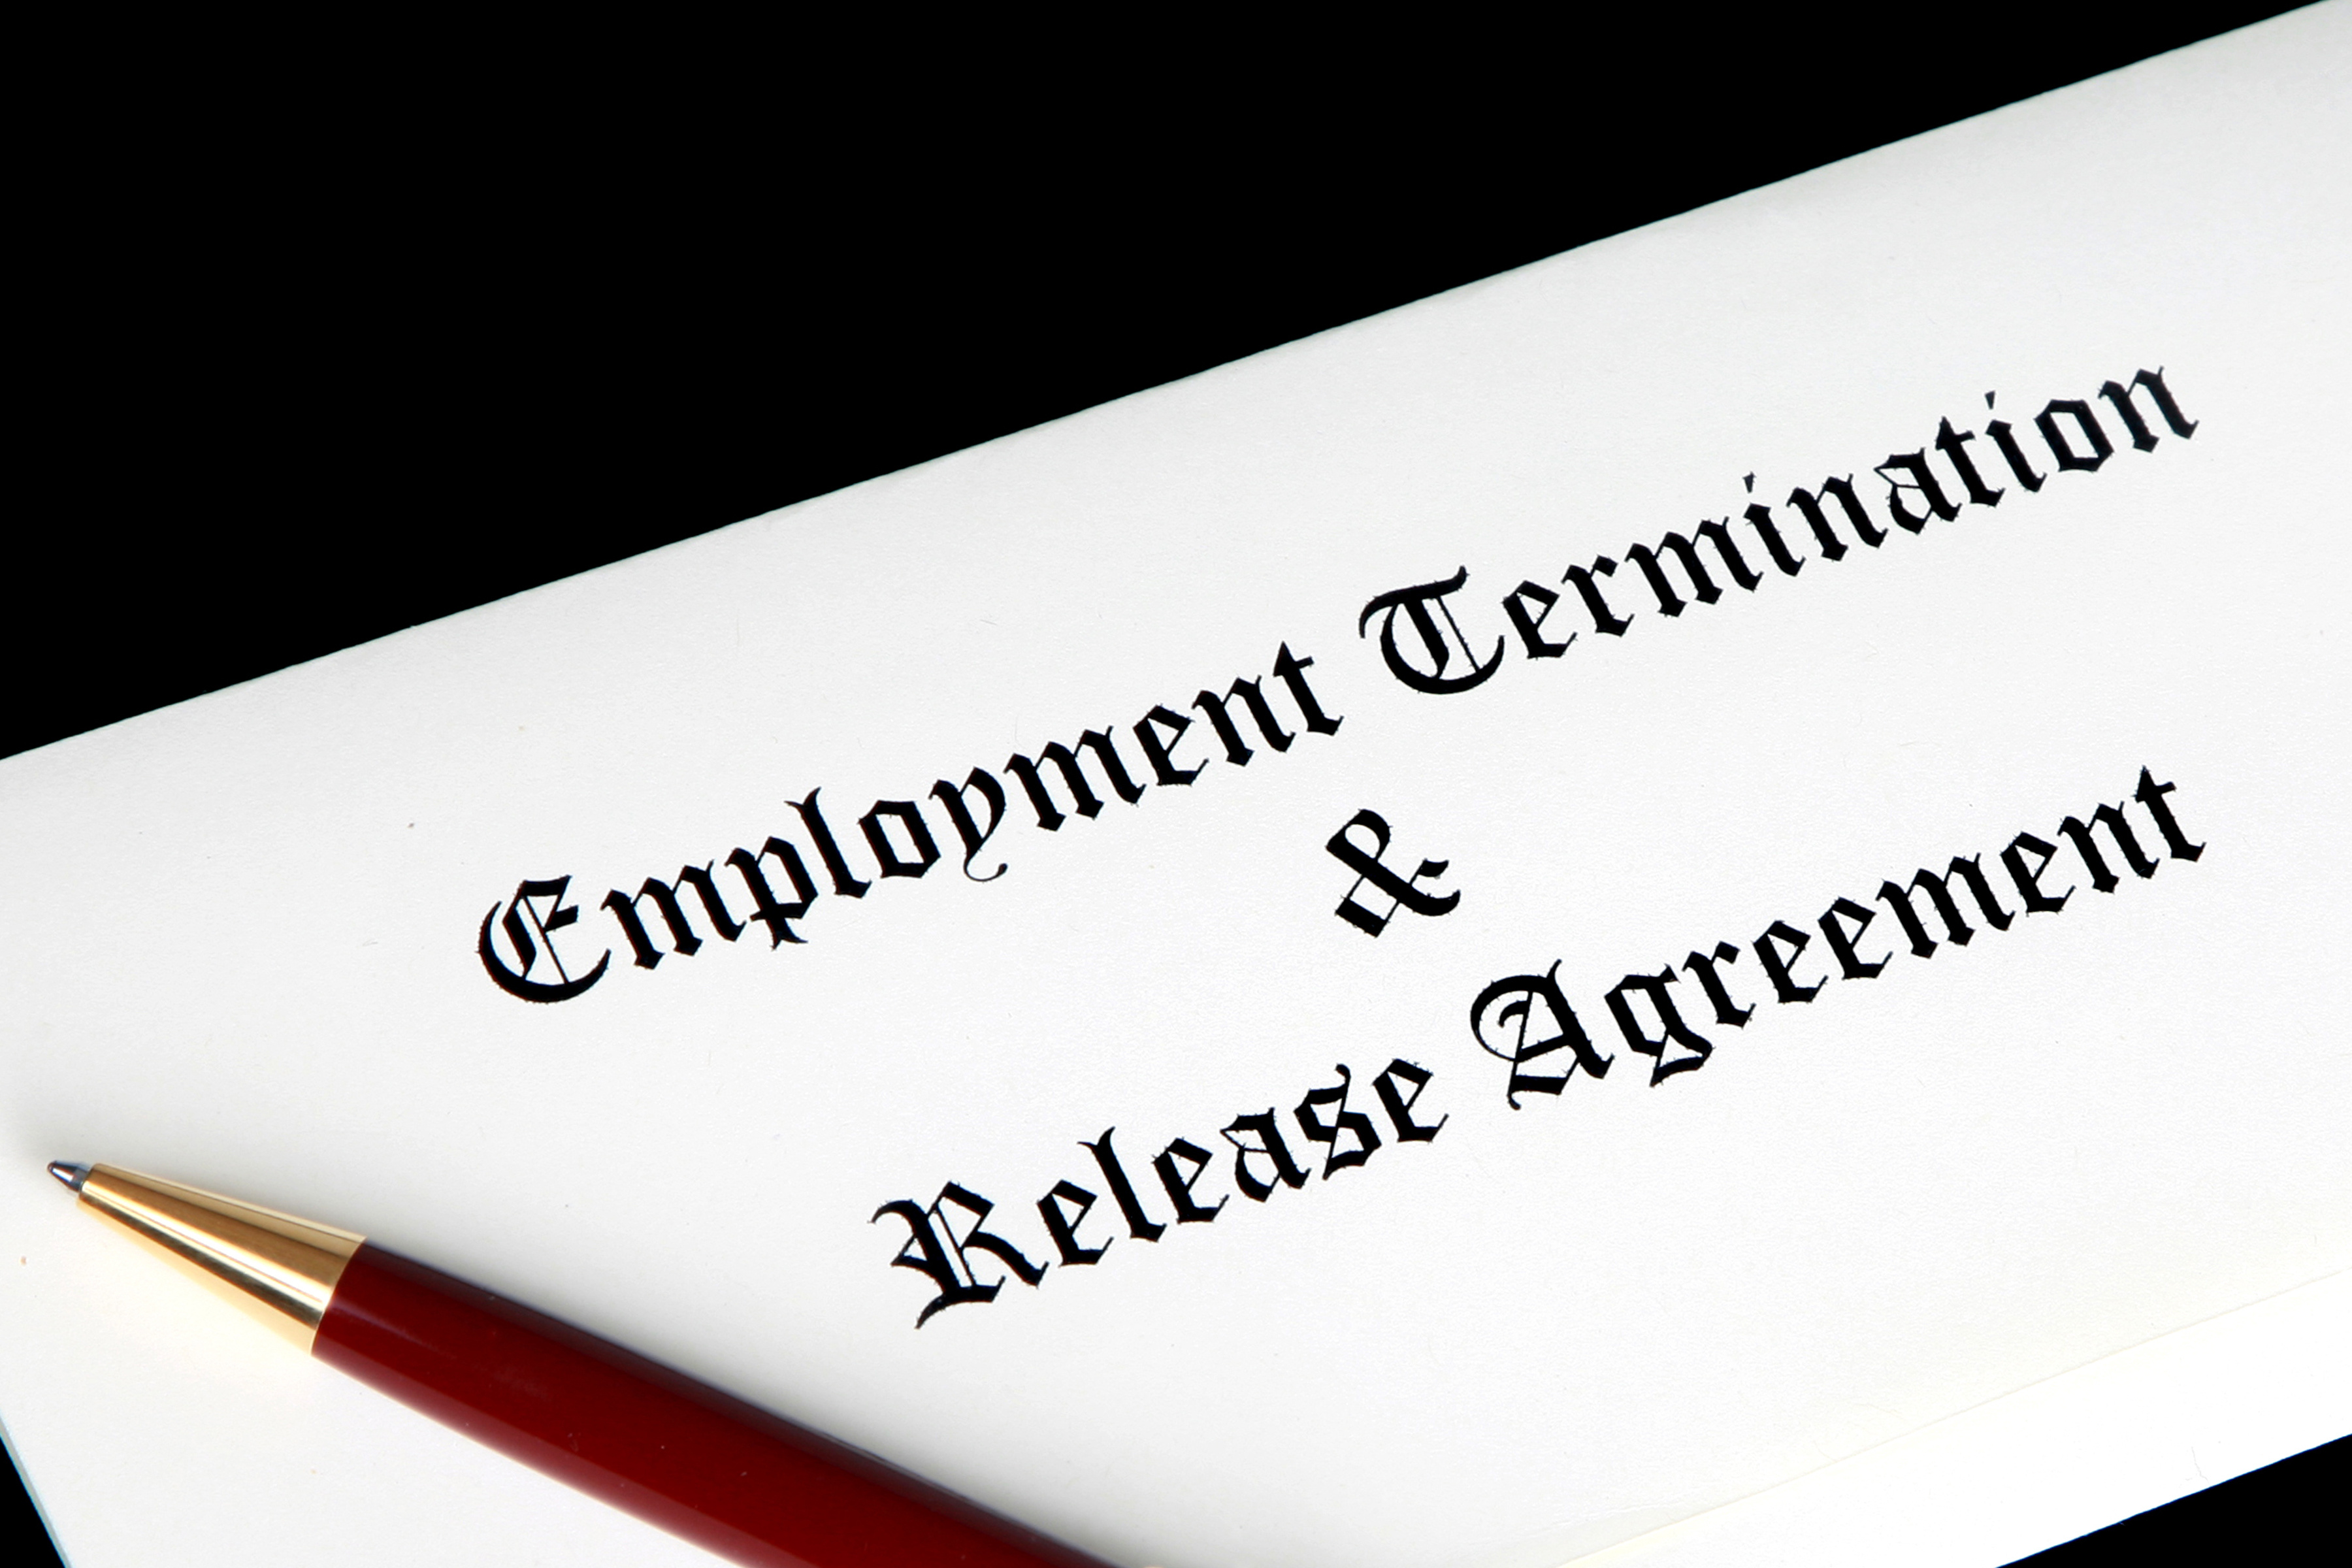 Severance agreement review